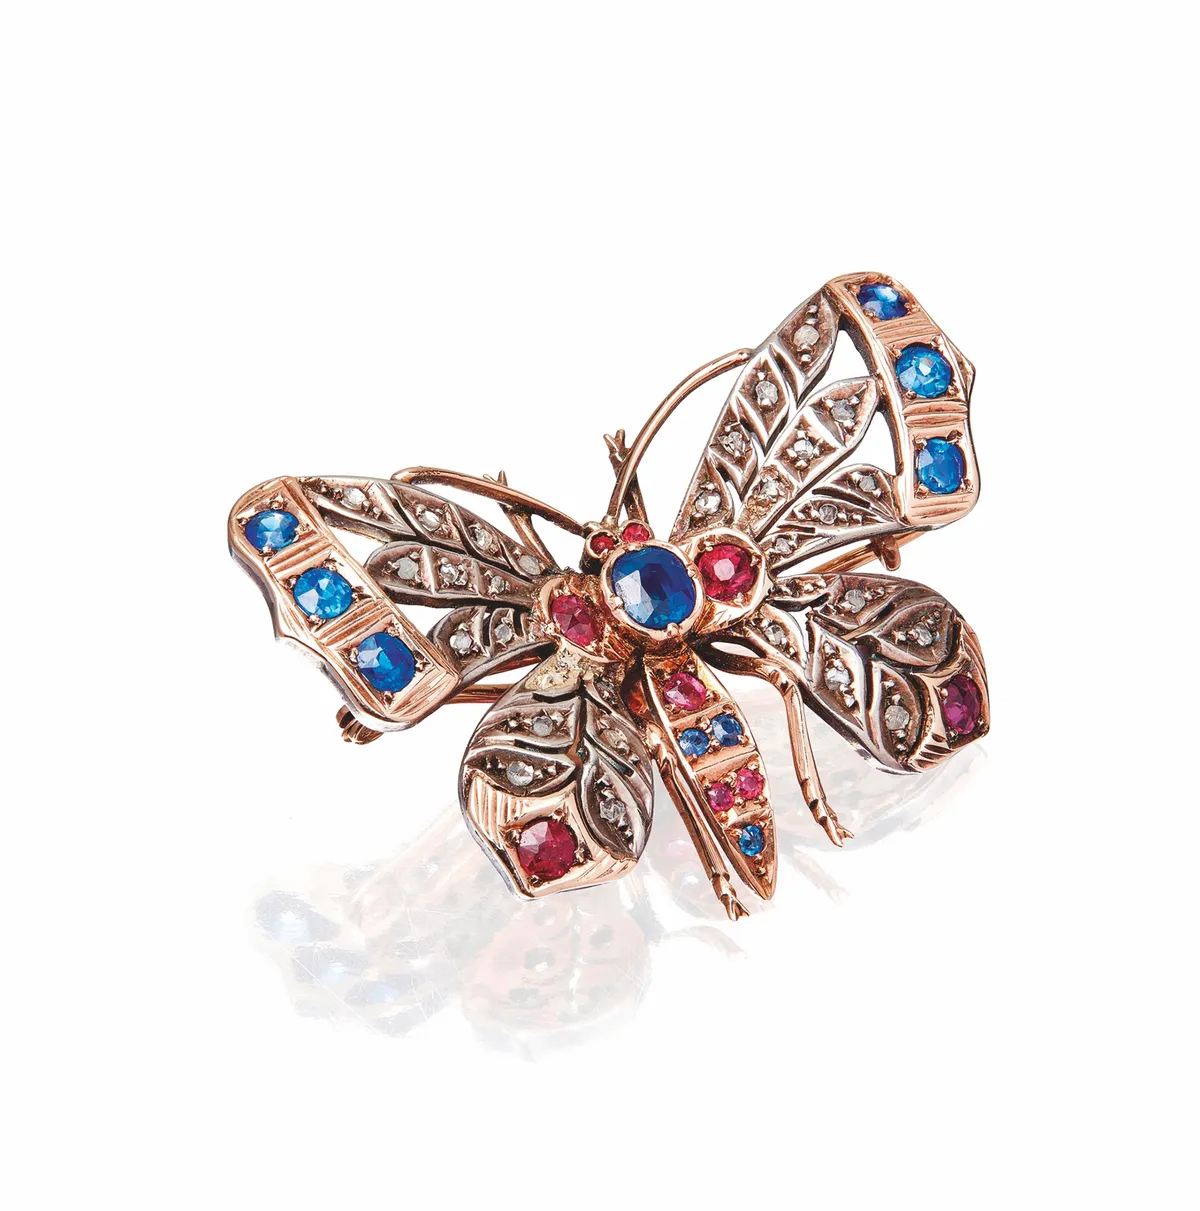 This late 19th-century multi-gem butterfly brooch sold for £325 at Lyon & Turnbull in July 2020.